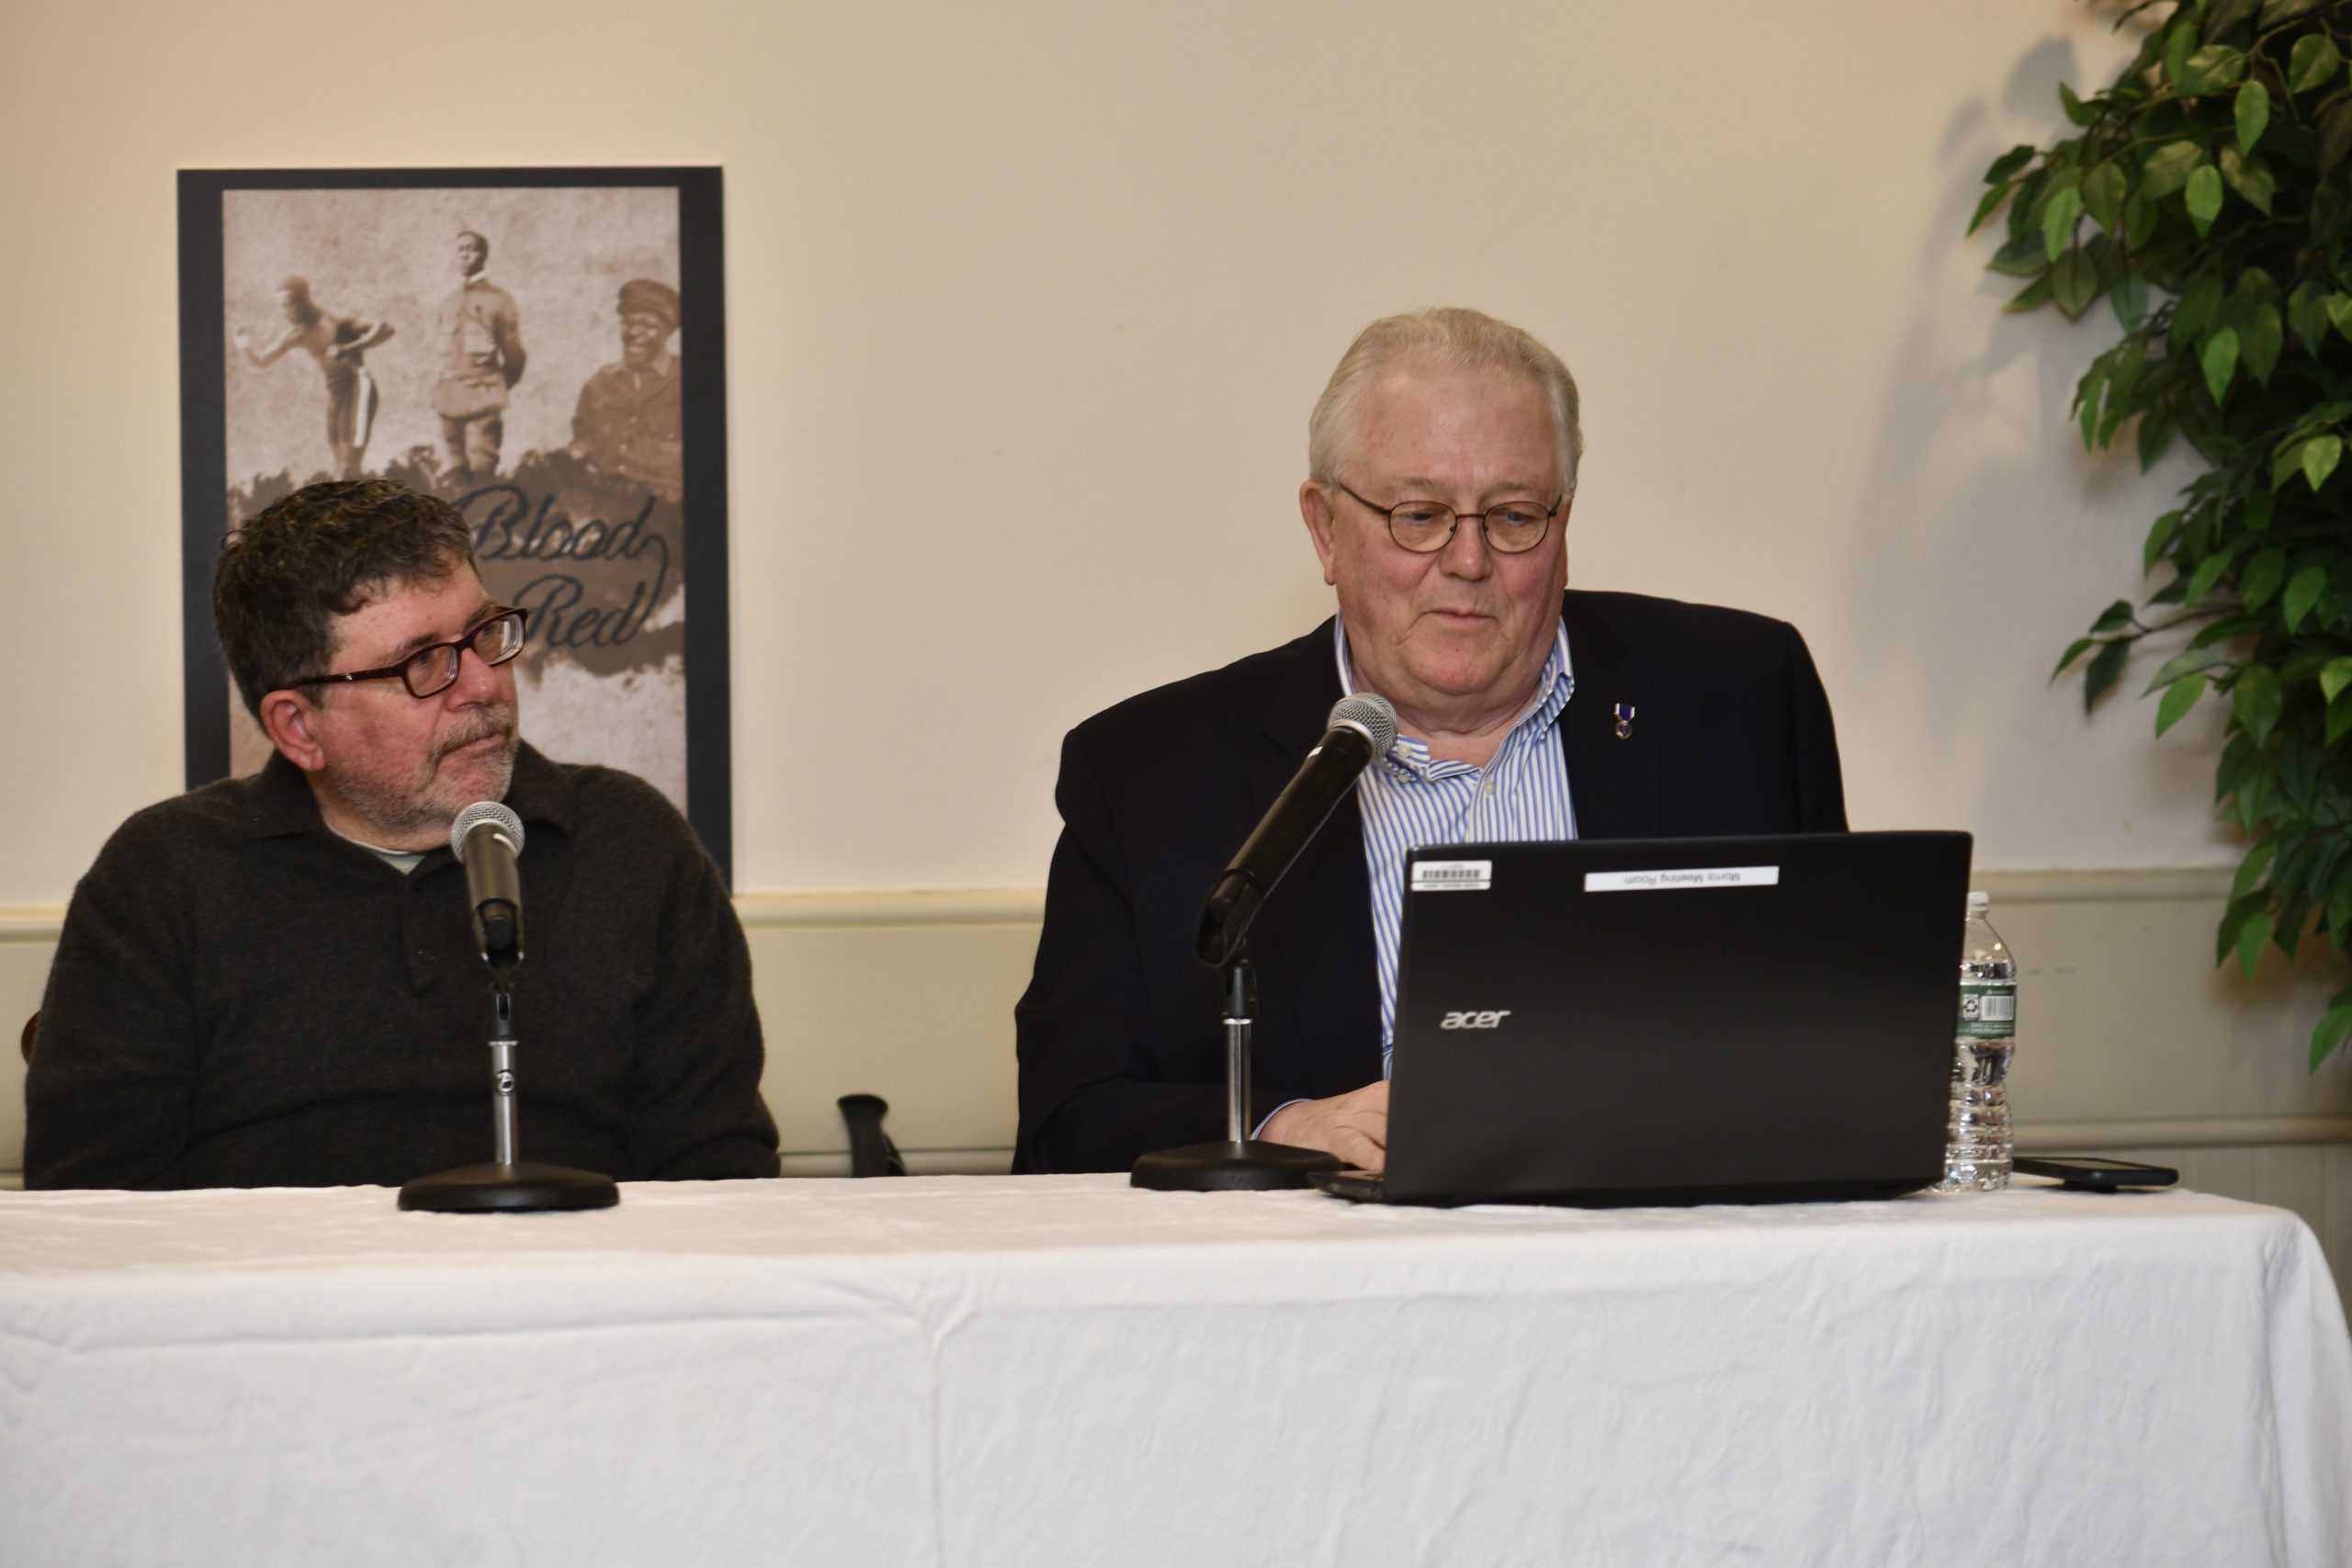 Authors Tom Clavin and Phil Keith talk about their book, “All Blood Runs Red: The Legendary Life of Eugene Bullard — Boxer, Pilot, Soldier, Spy,” at the Rogers Memorial Library in November. DANA SHAW